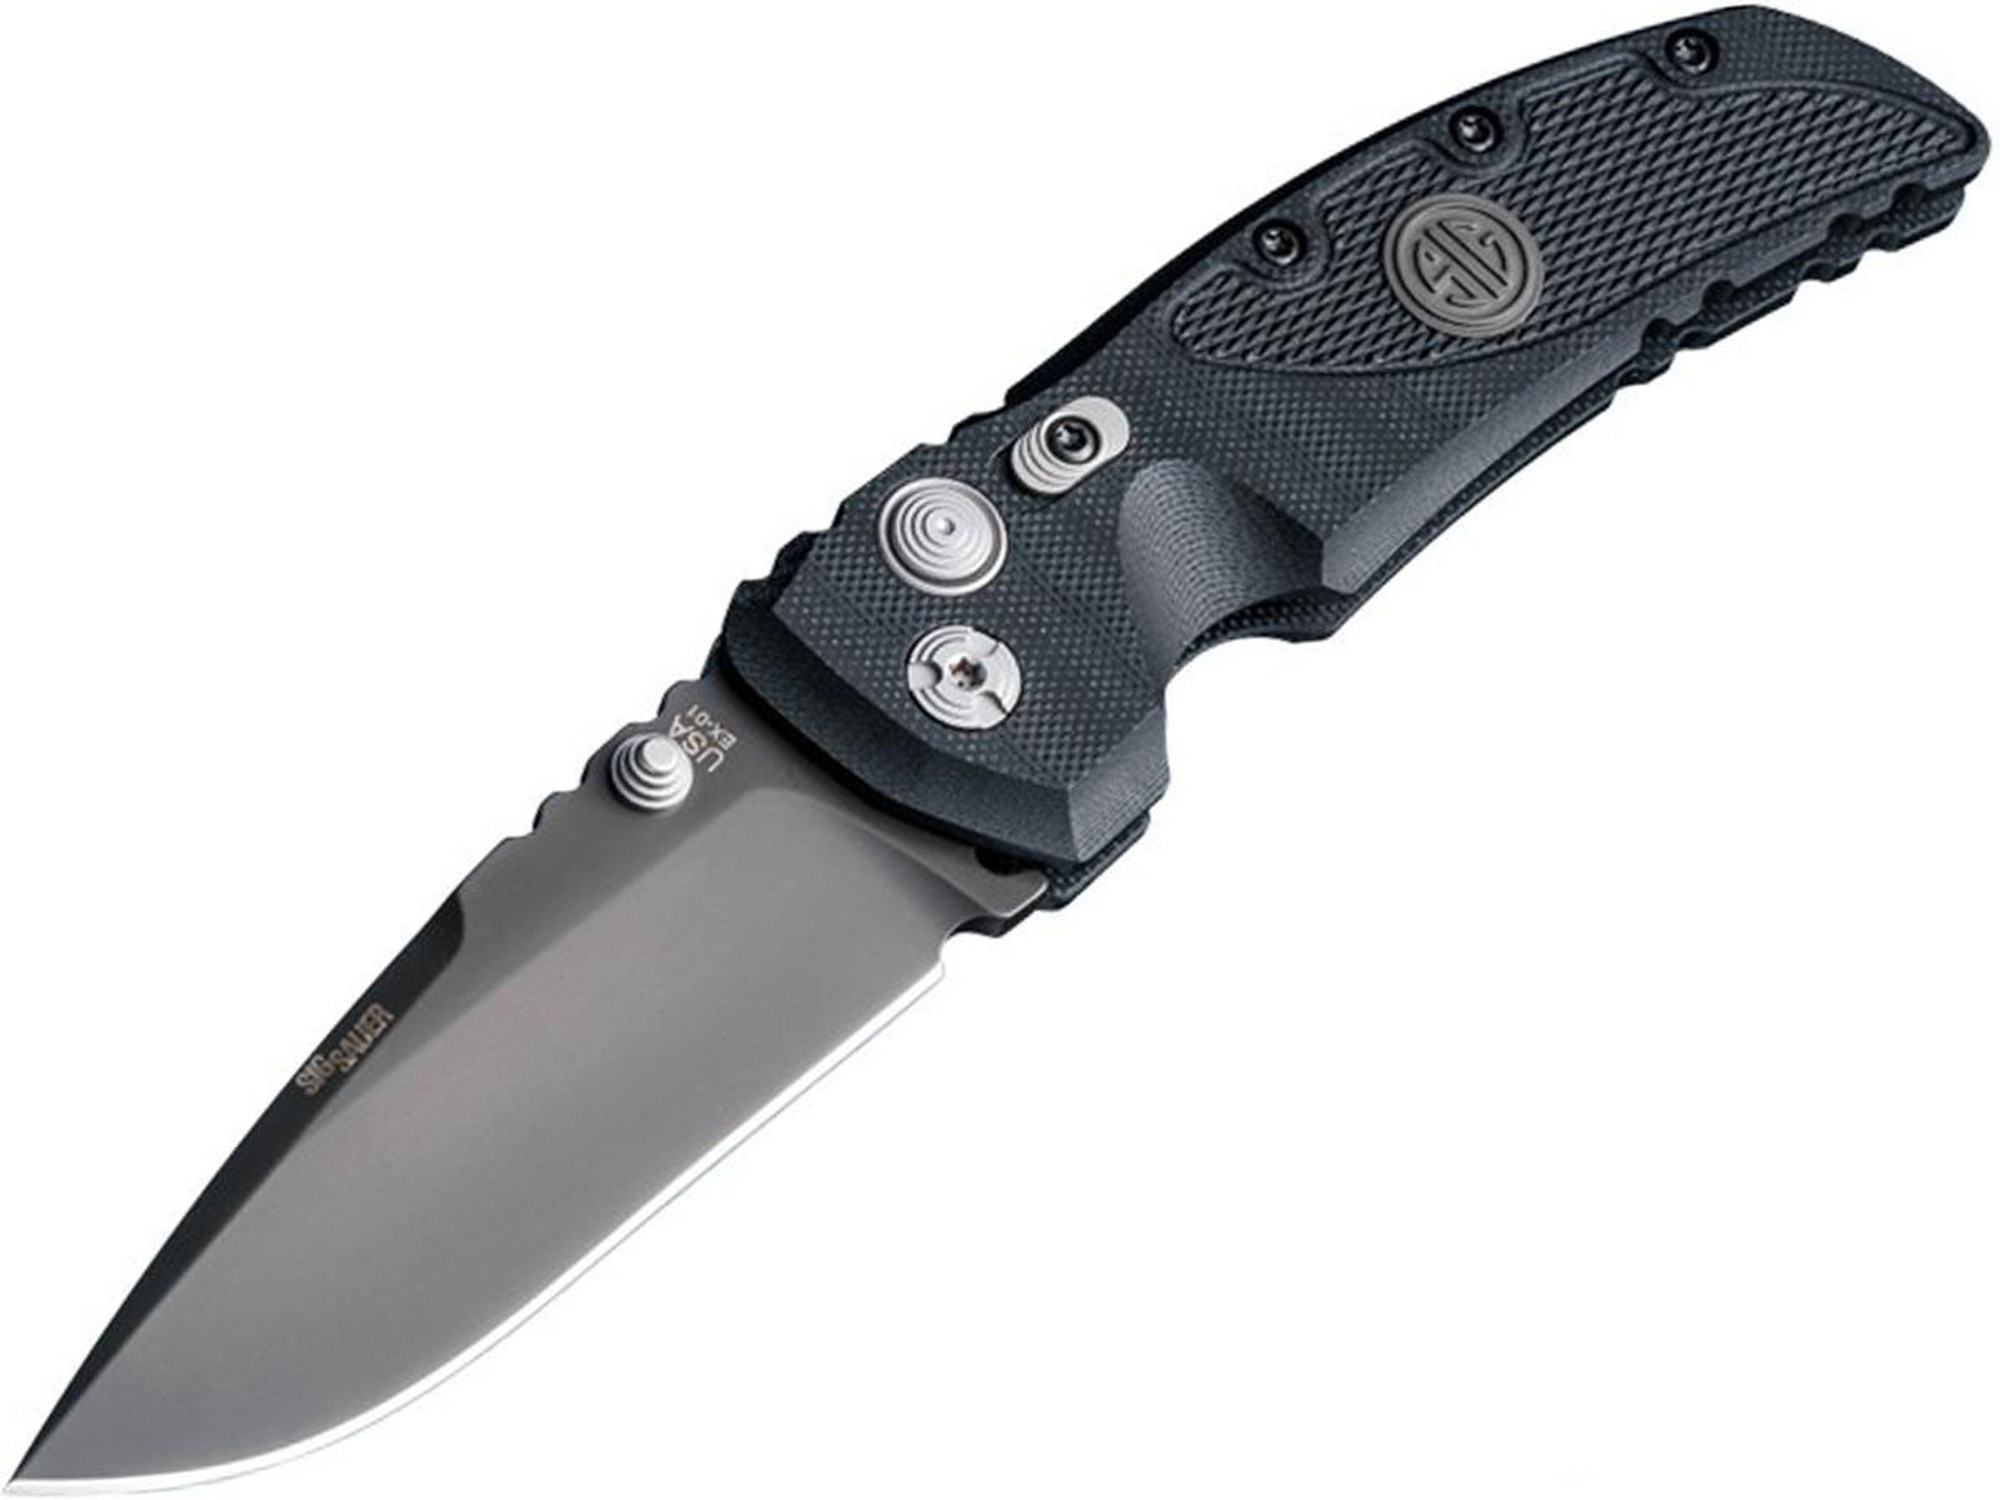 SIG Sauer Tactical Folding Knife with 3.5" Drop Point Blade and G10 Grips (Color: Grey PVD)